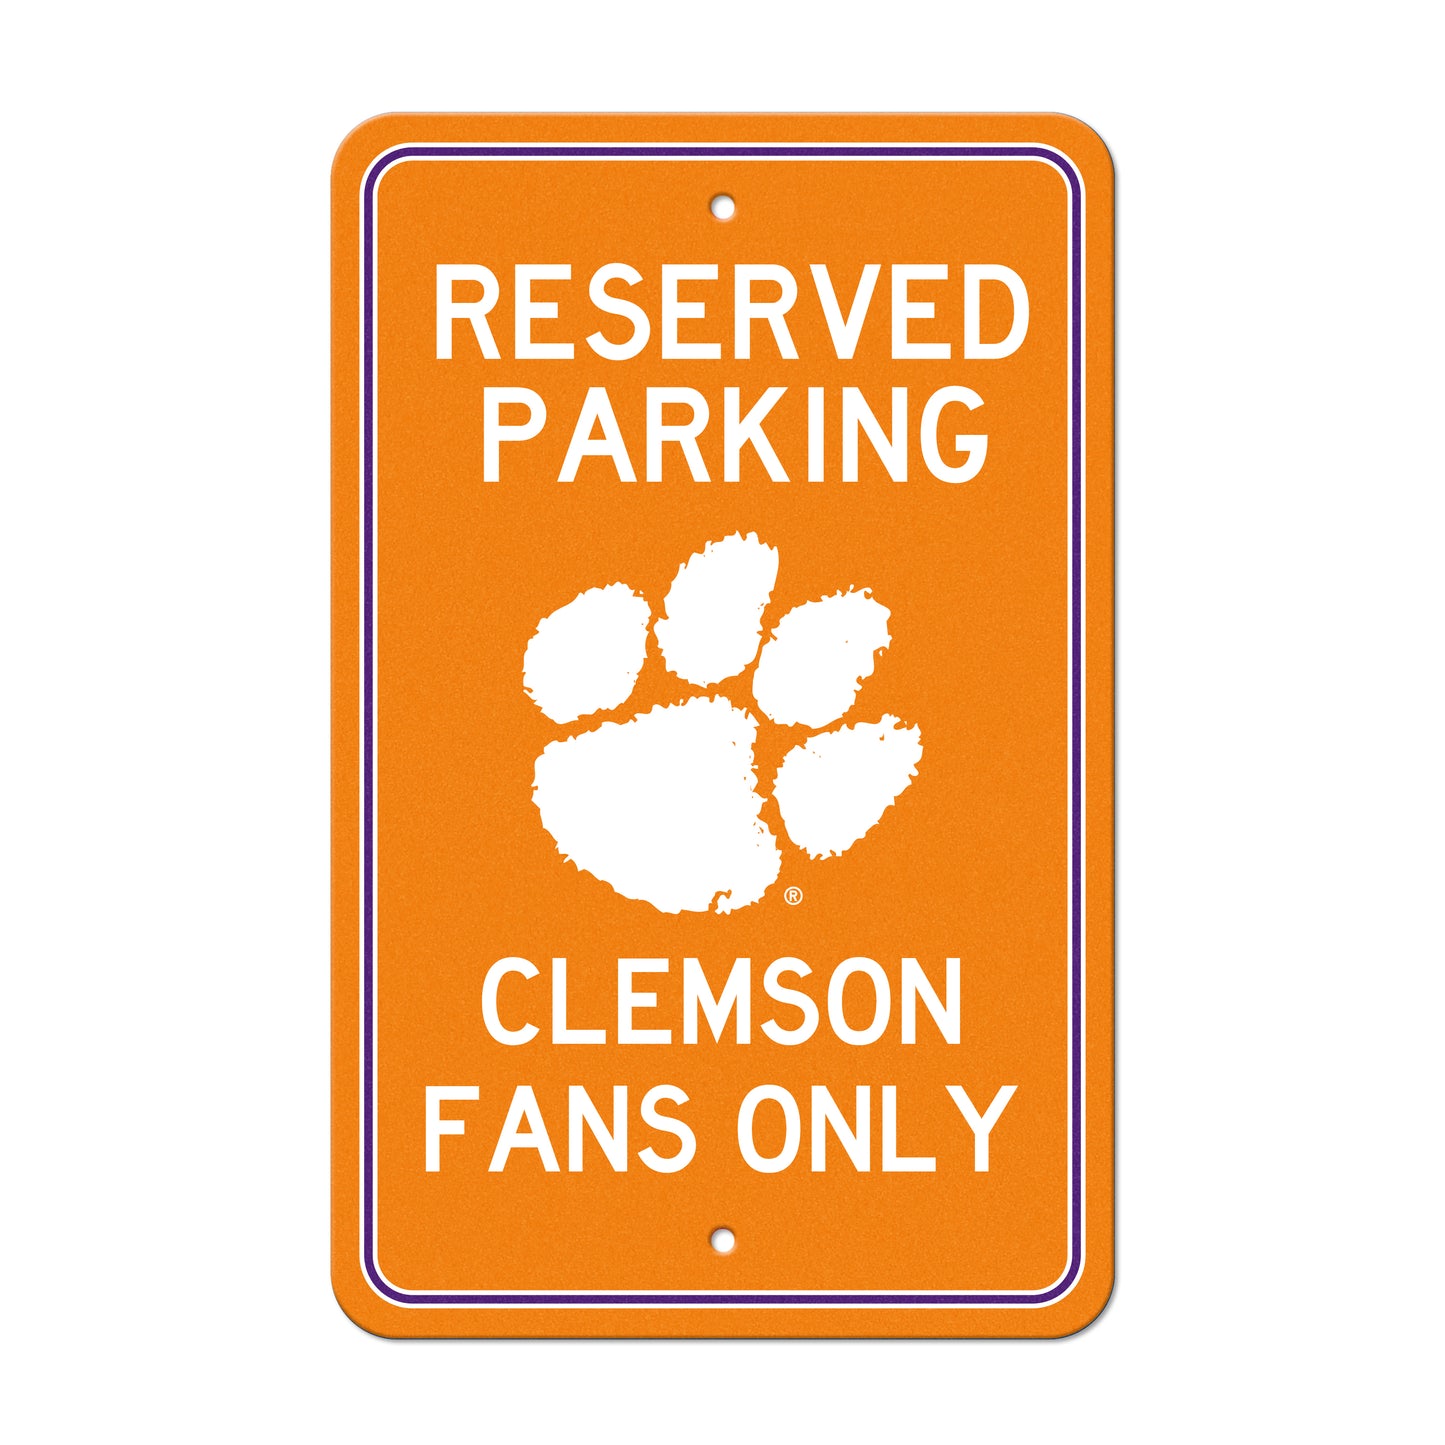 Clemson Tigers Team Color Reserved Parking Sign Décor 18in. X 11.5in. Lightweight